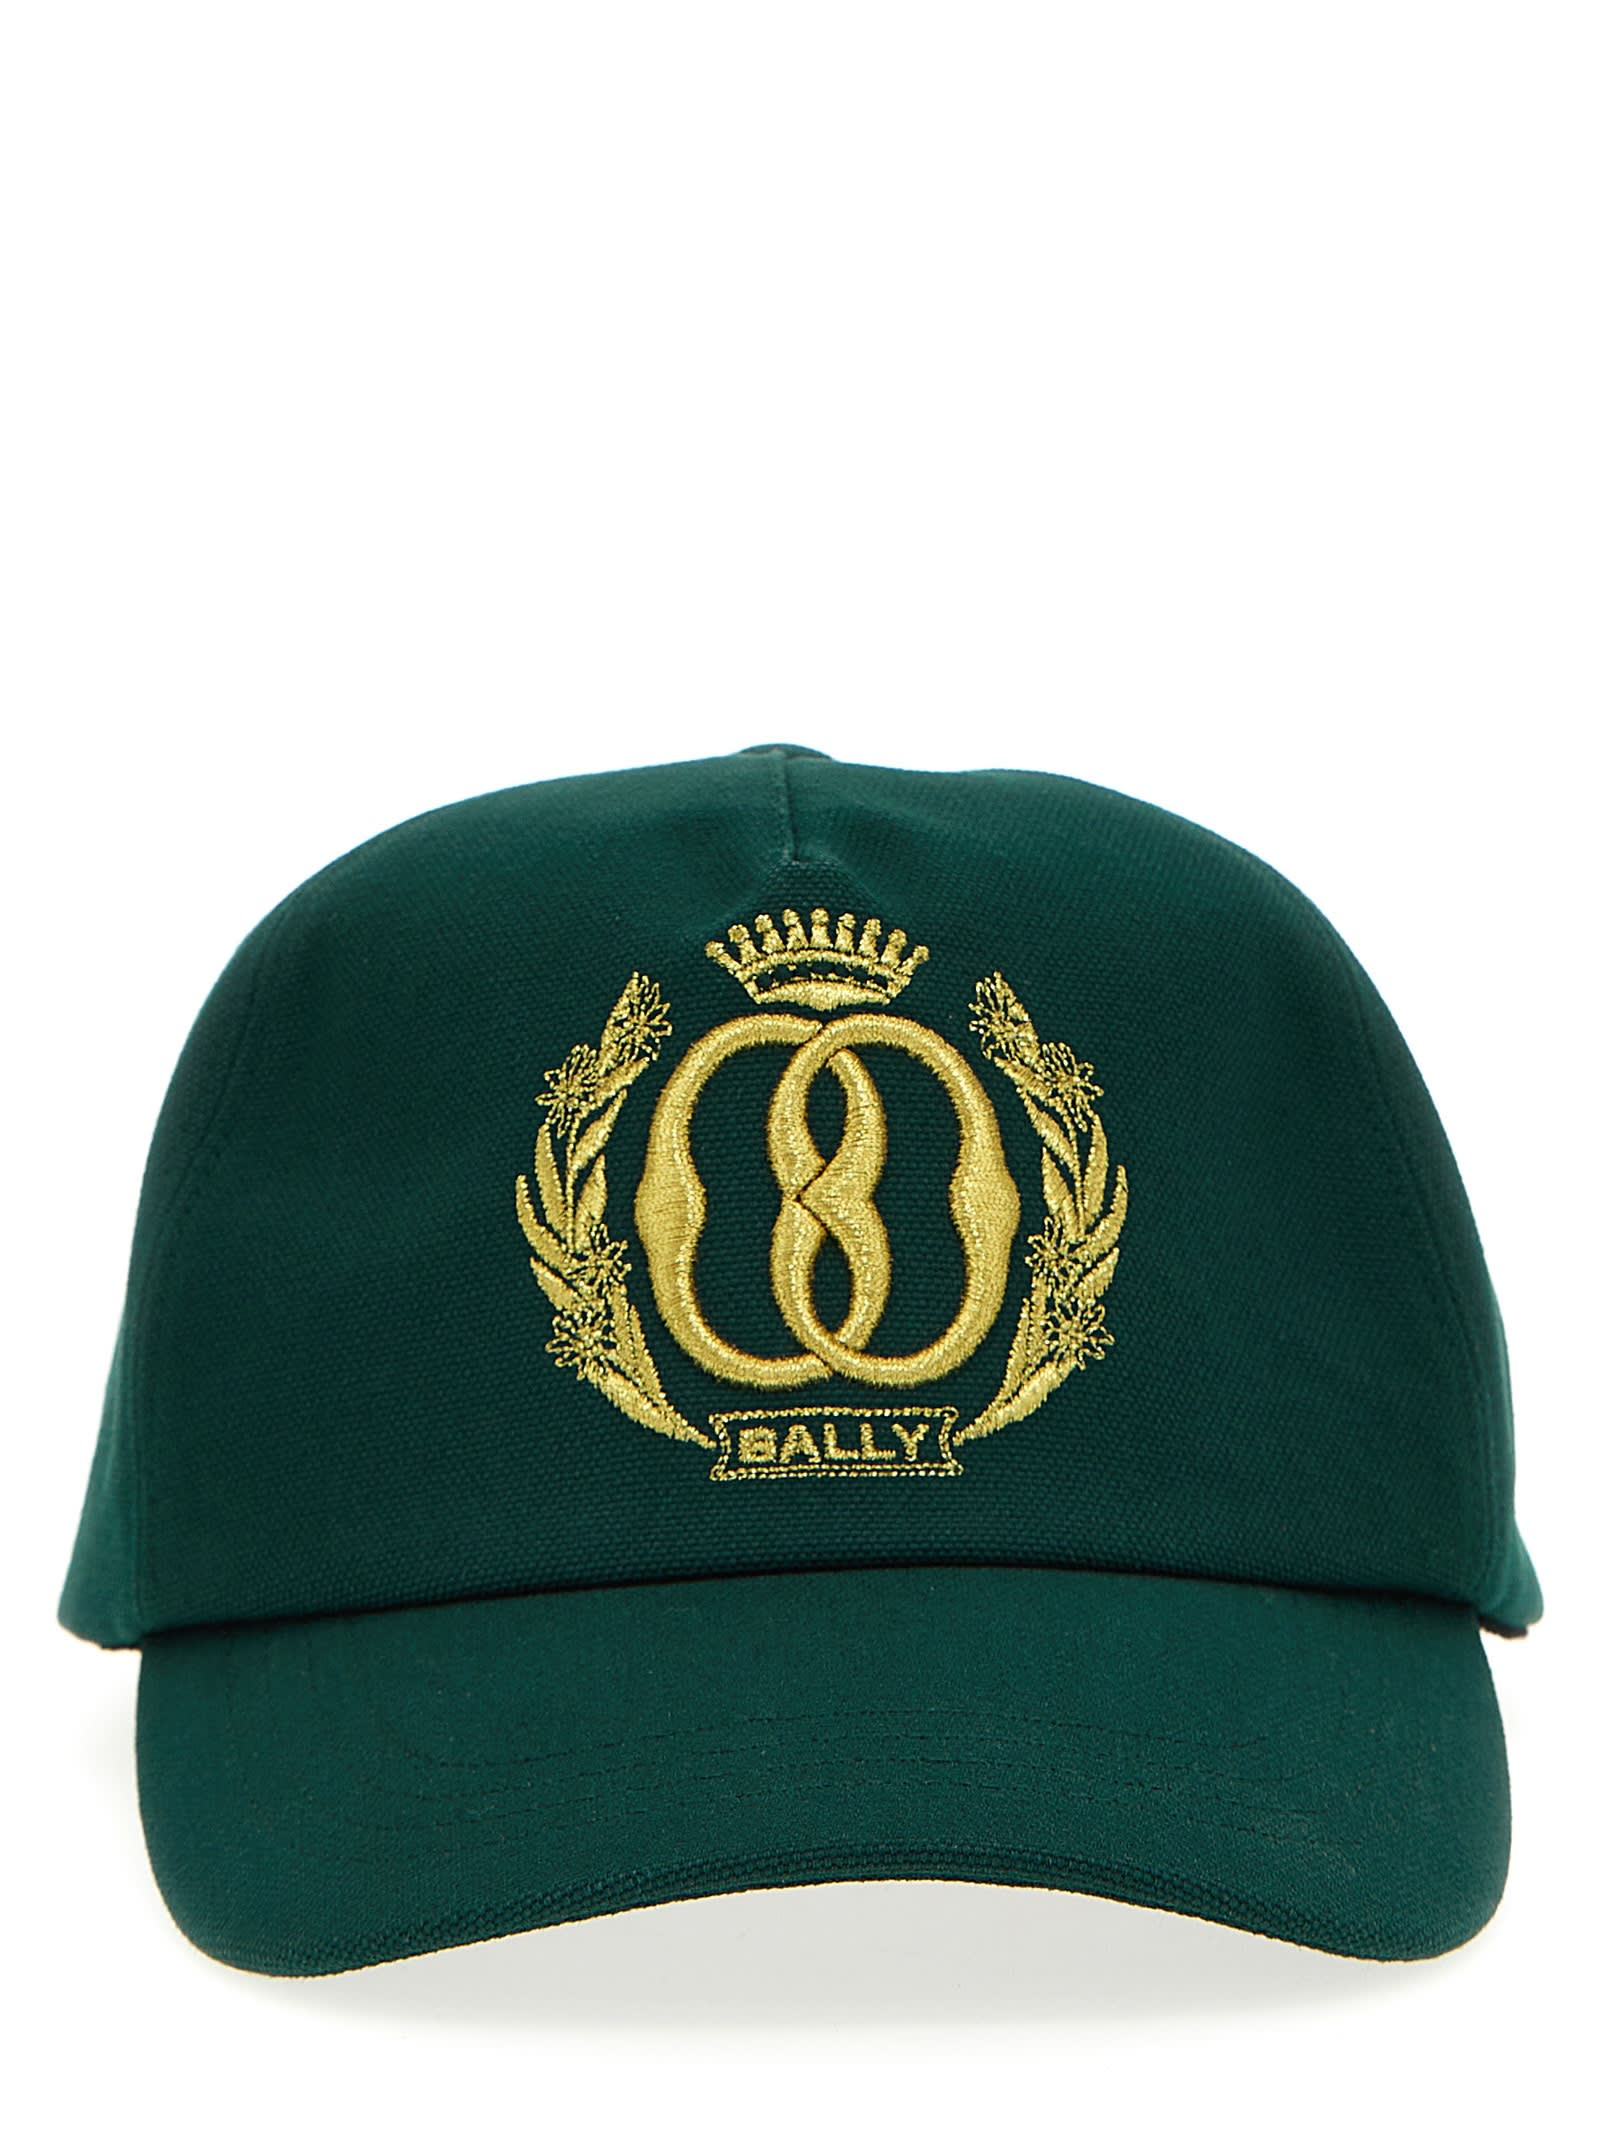 BALLY EMBROIDERED LOGO HAT